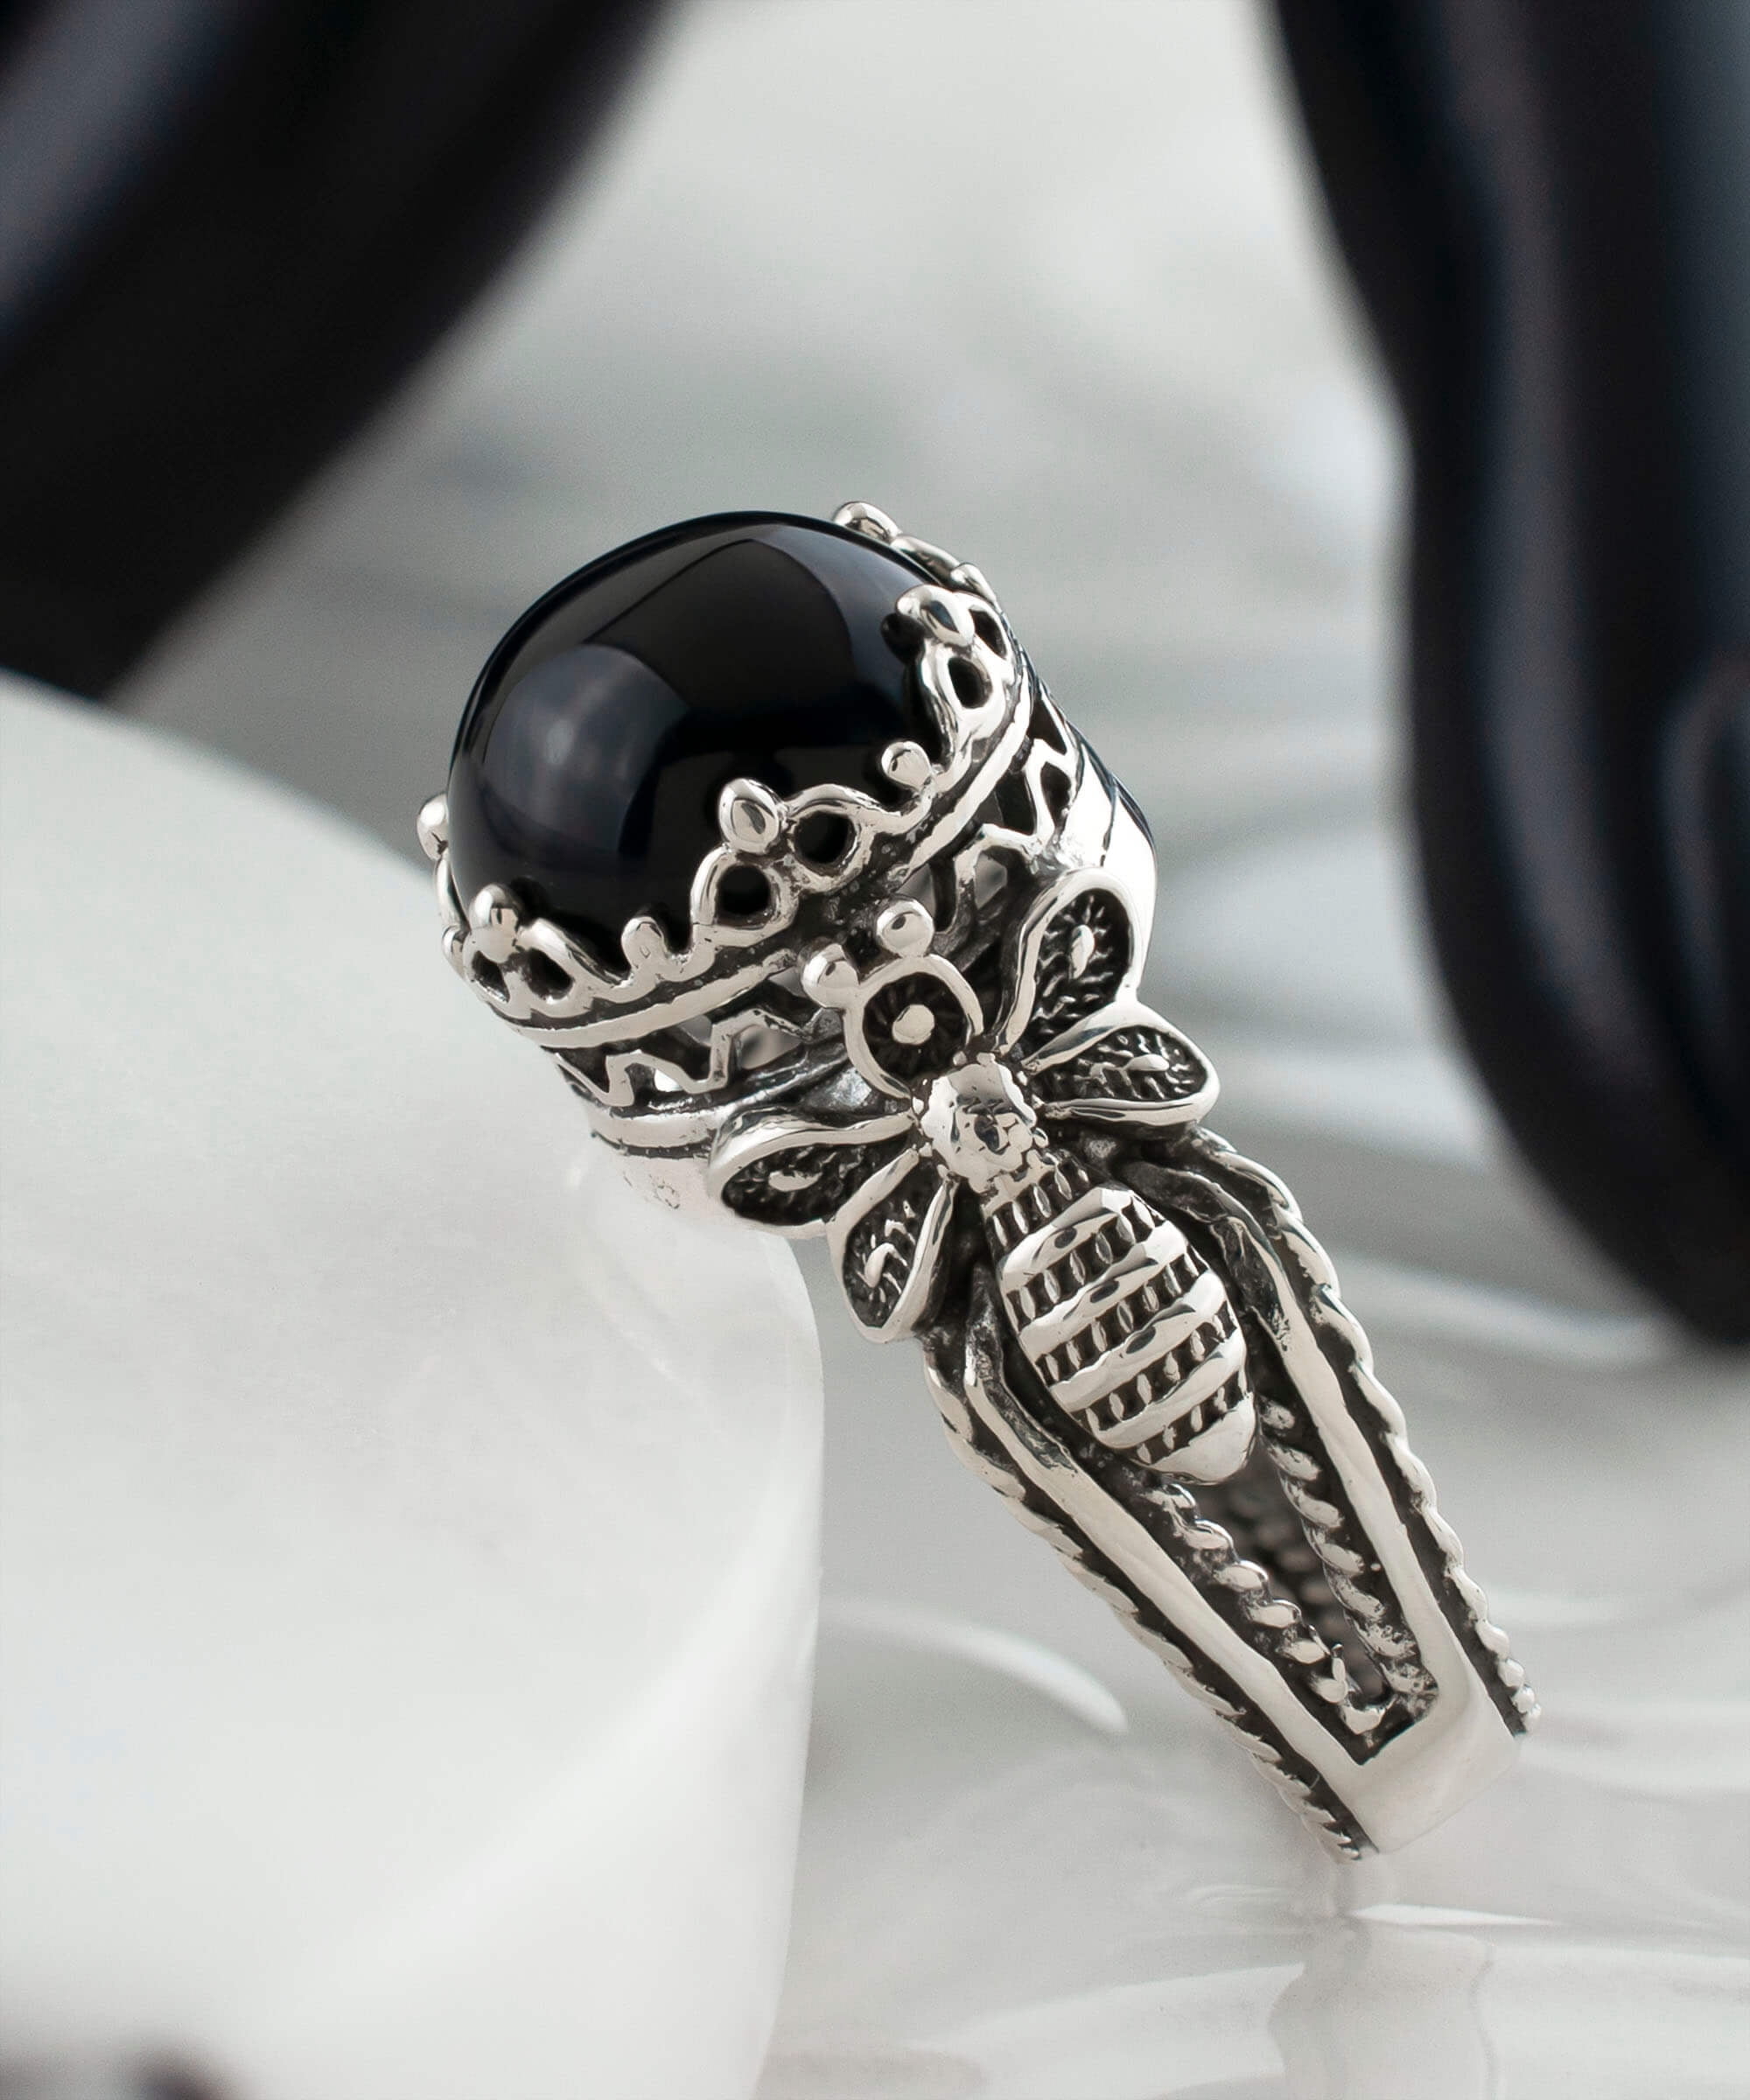 Buy Sterling Silver Black Onyx Ring, Vintage Style Onyx Ring, Pinky Ring,  Onyx Statement Ring, Black Stone Ring Online in India - Etsy